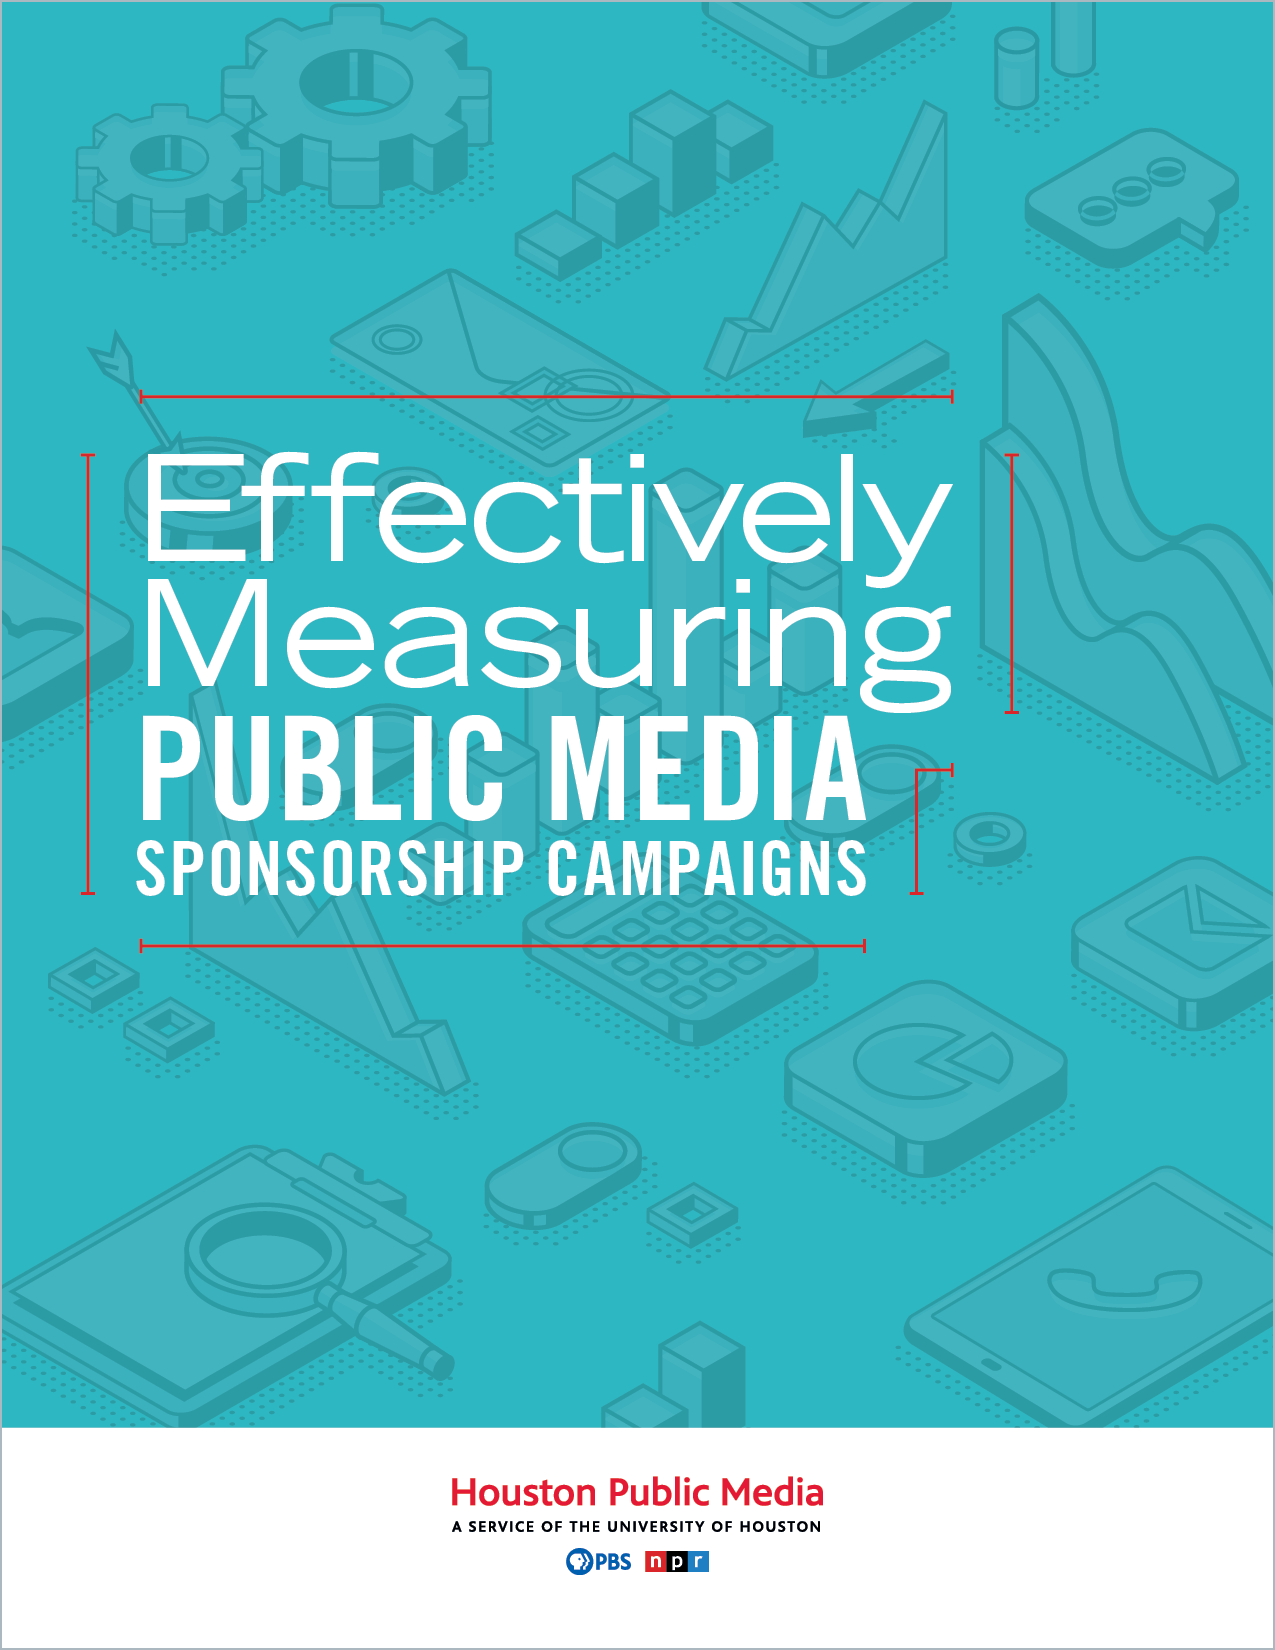 HOU_Effectively Measuring Public Media Sponsorship Campaigns_040822